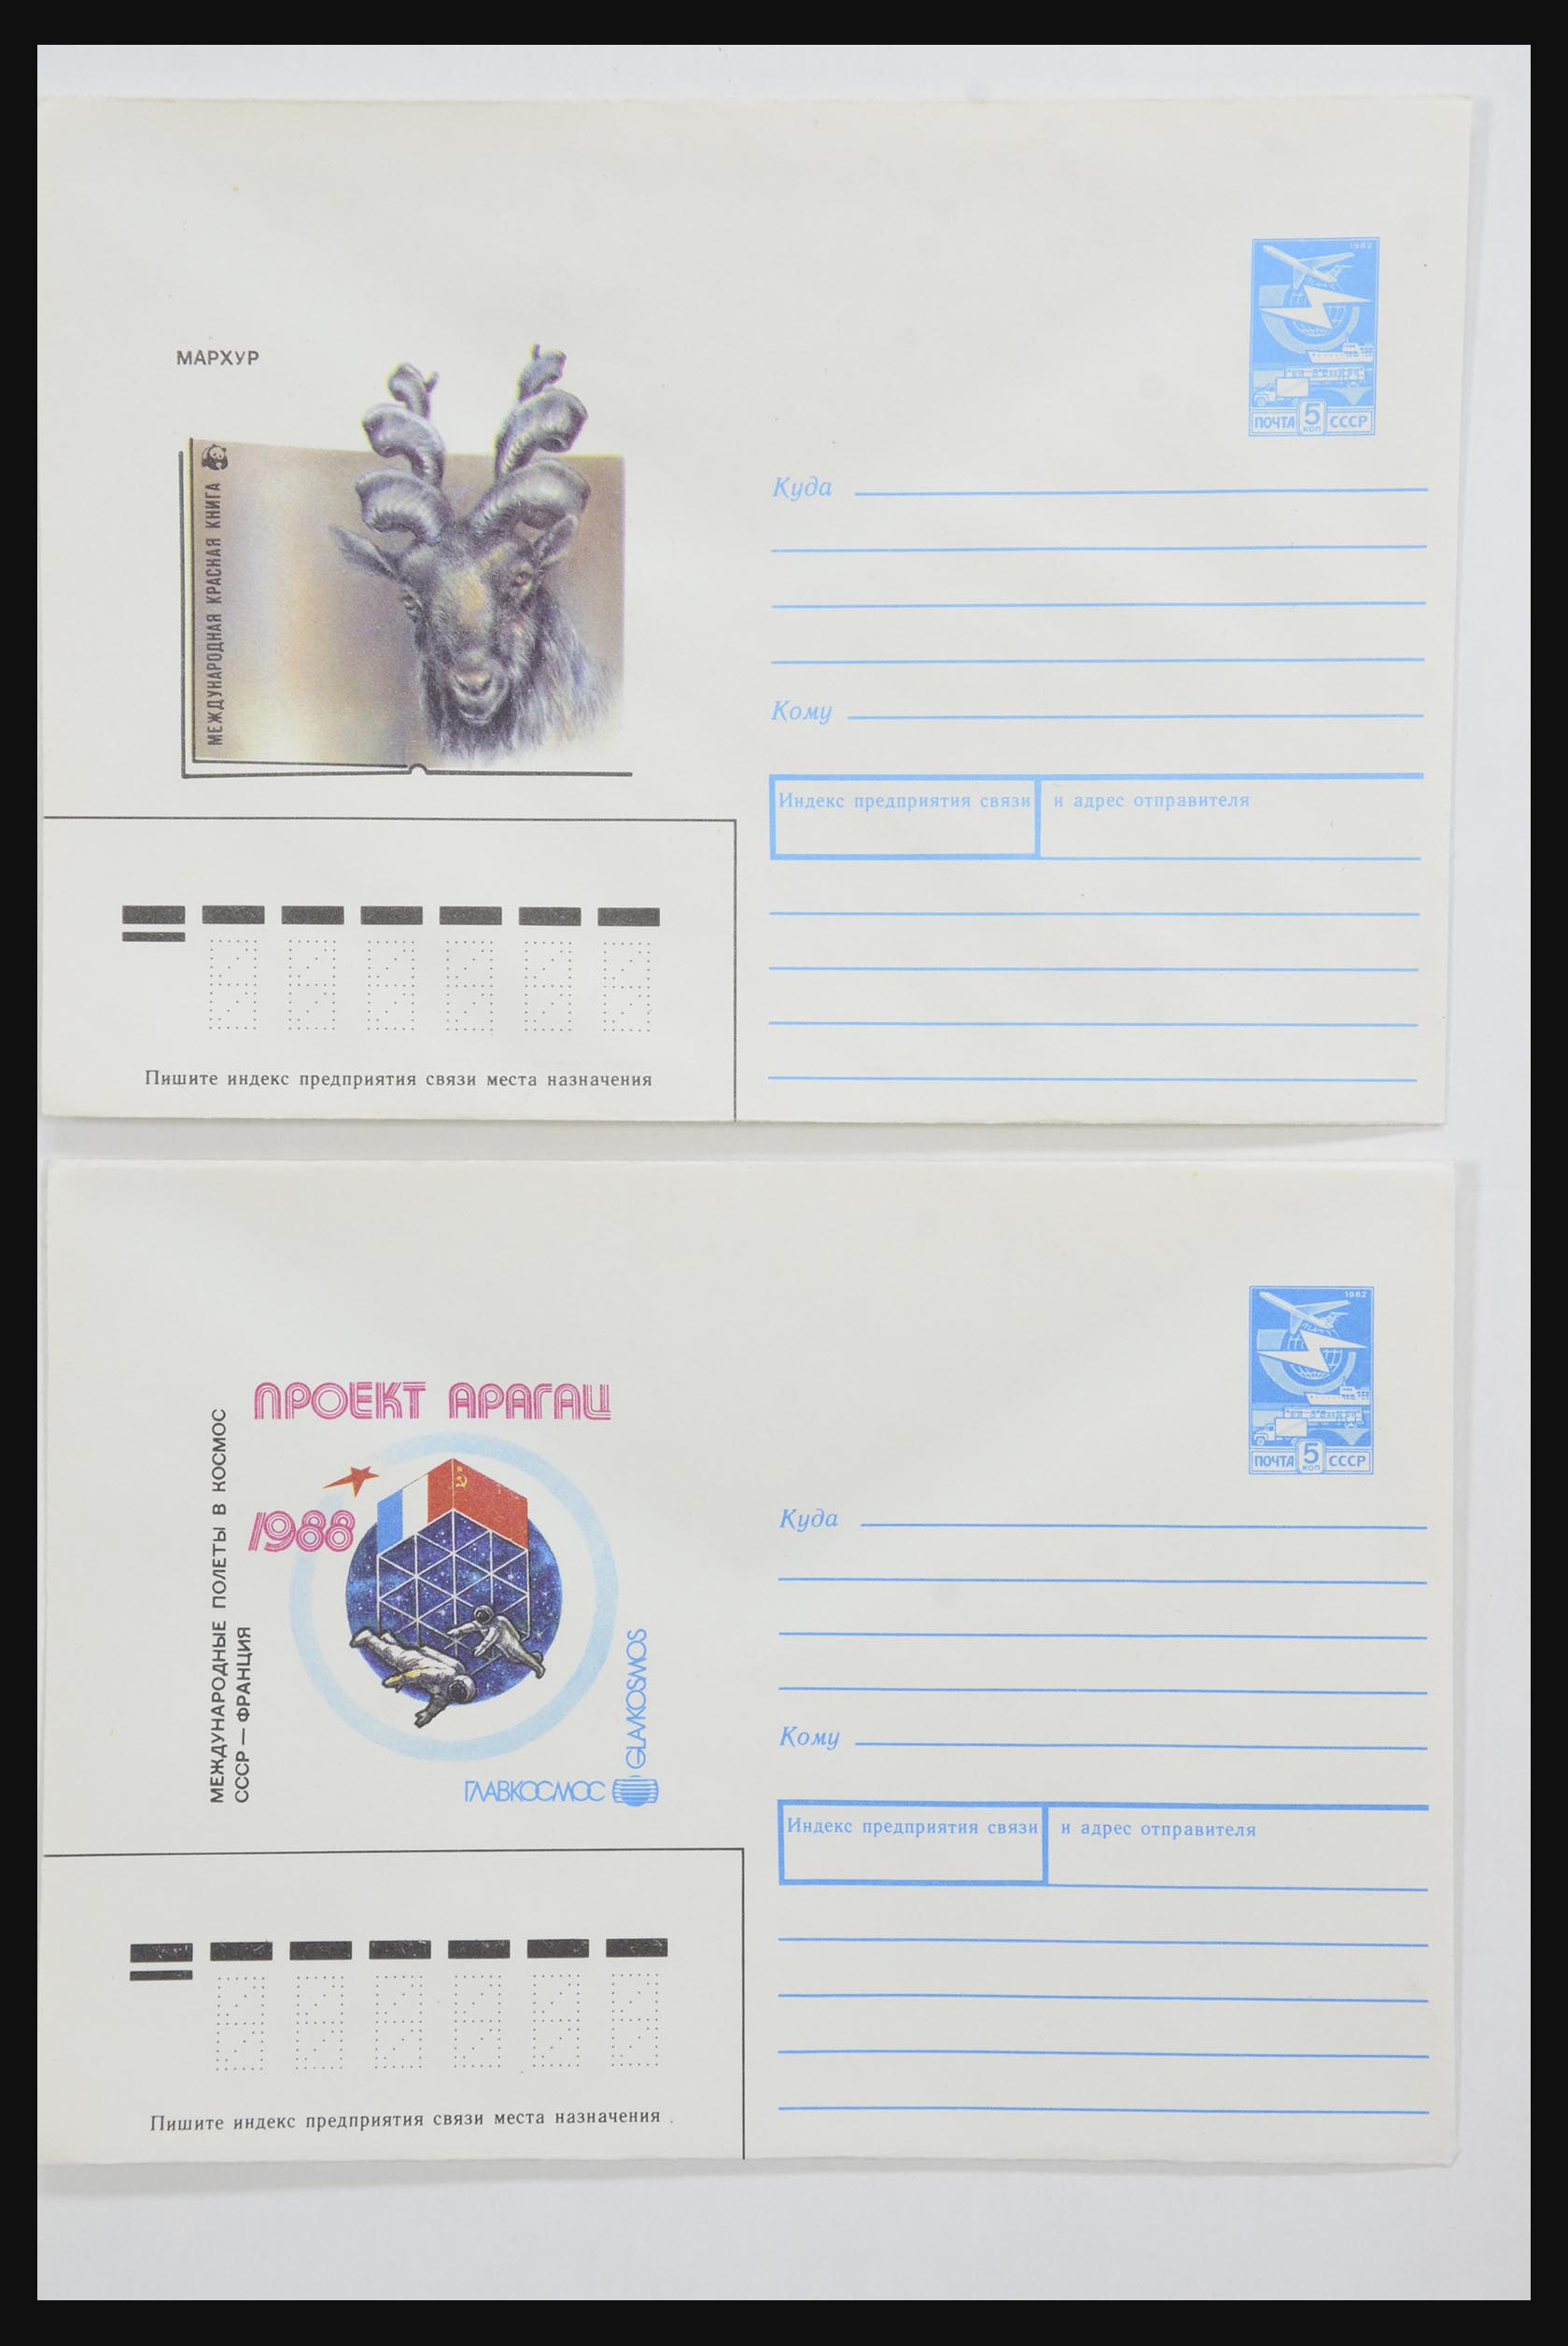 31928 0038 - 31928 Eastern Europe covers 1960's-1990's.